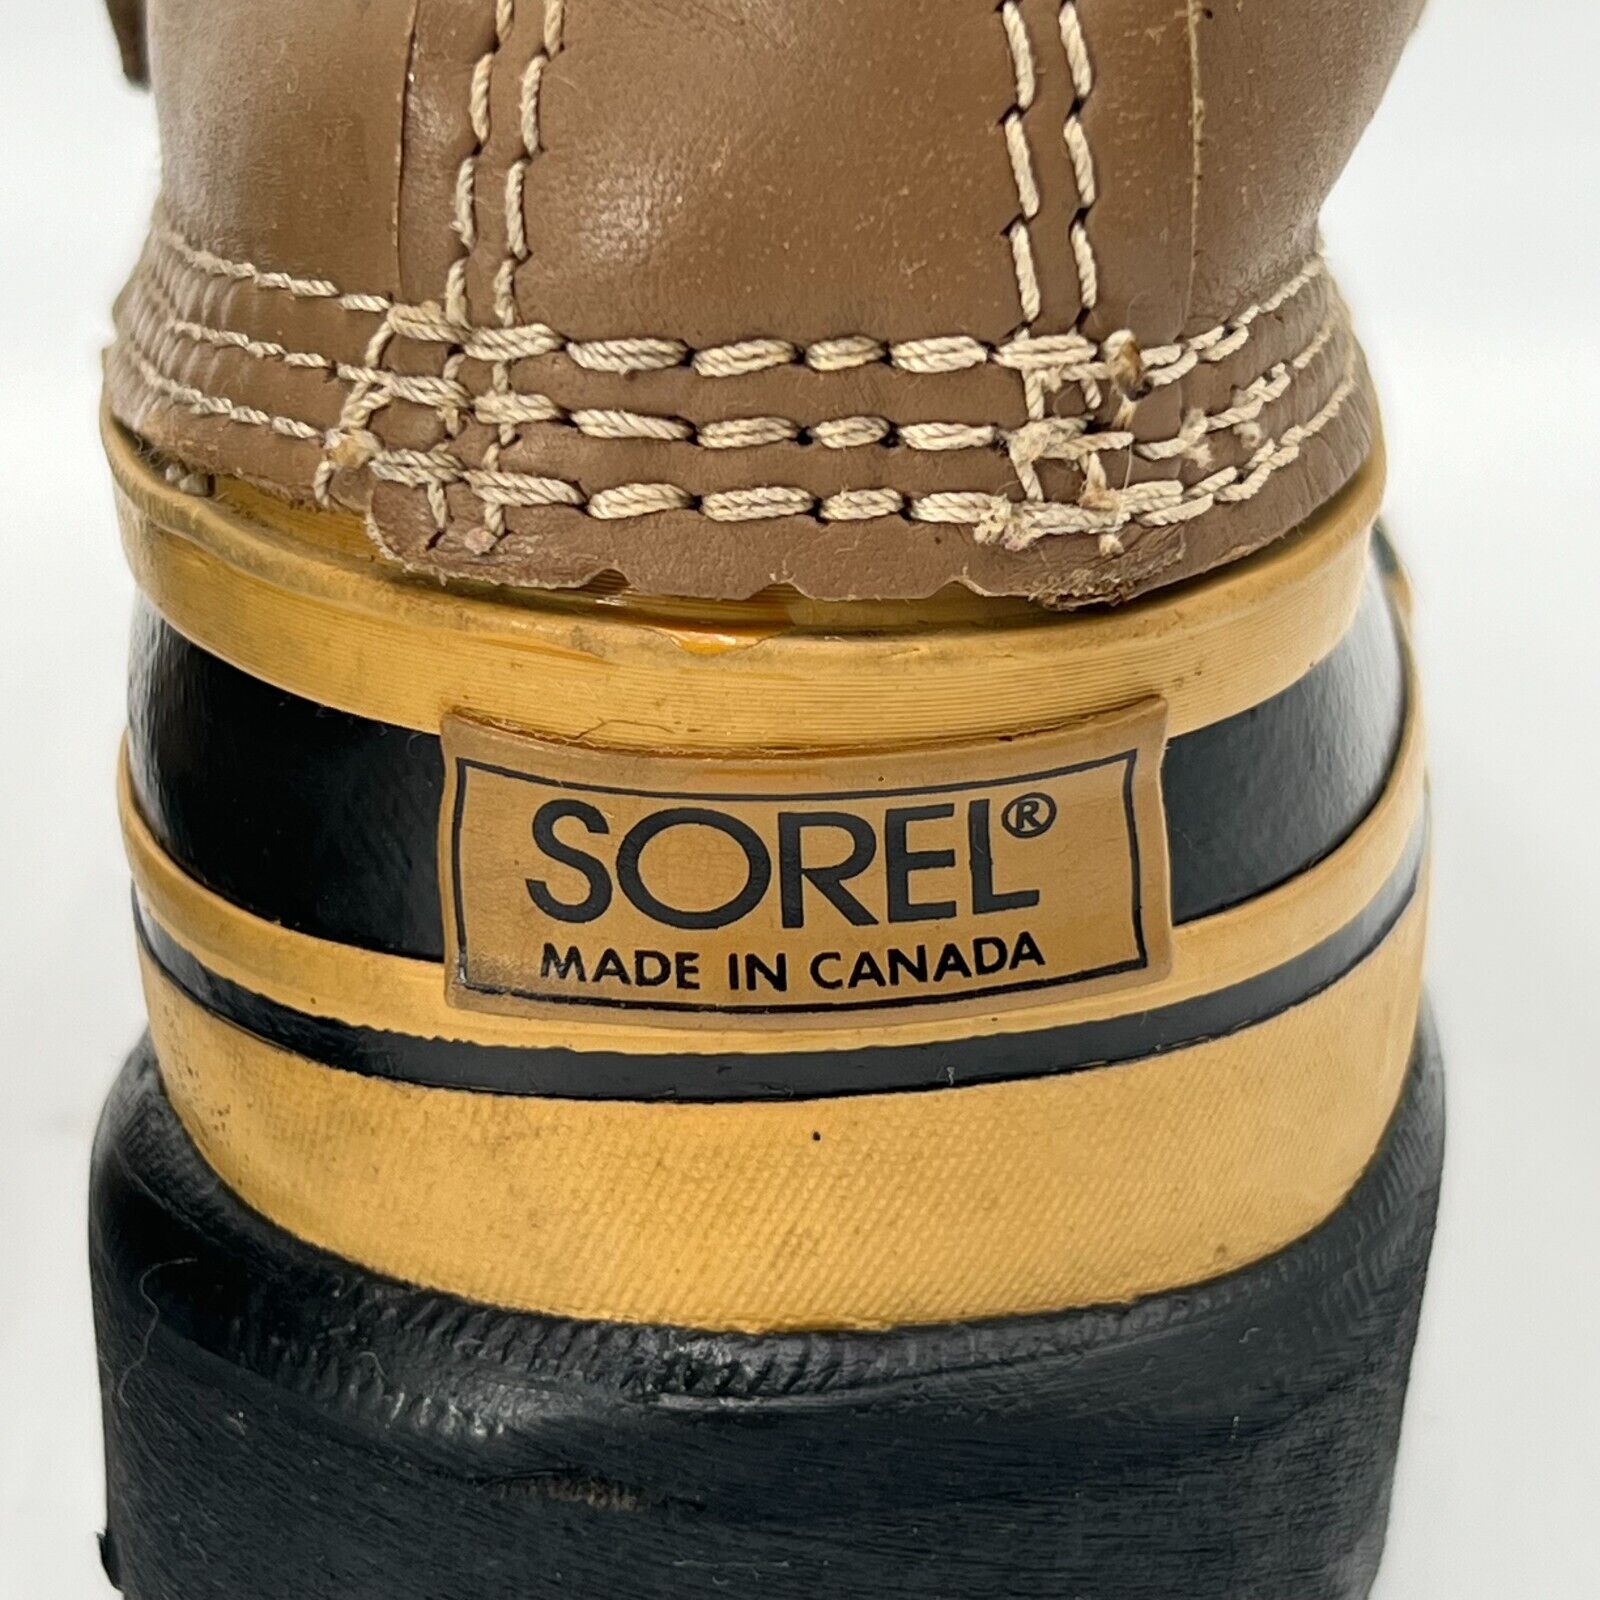 Sorel Caribou Brown Canadian Leather Rubber Wool Lined Winter Boots Womens Size